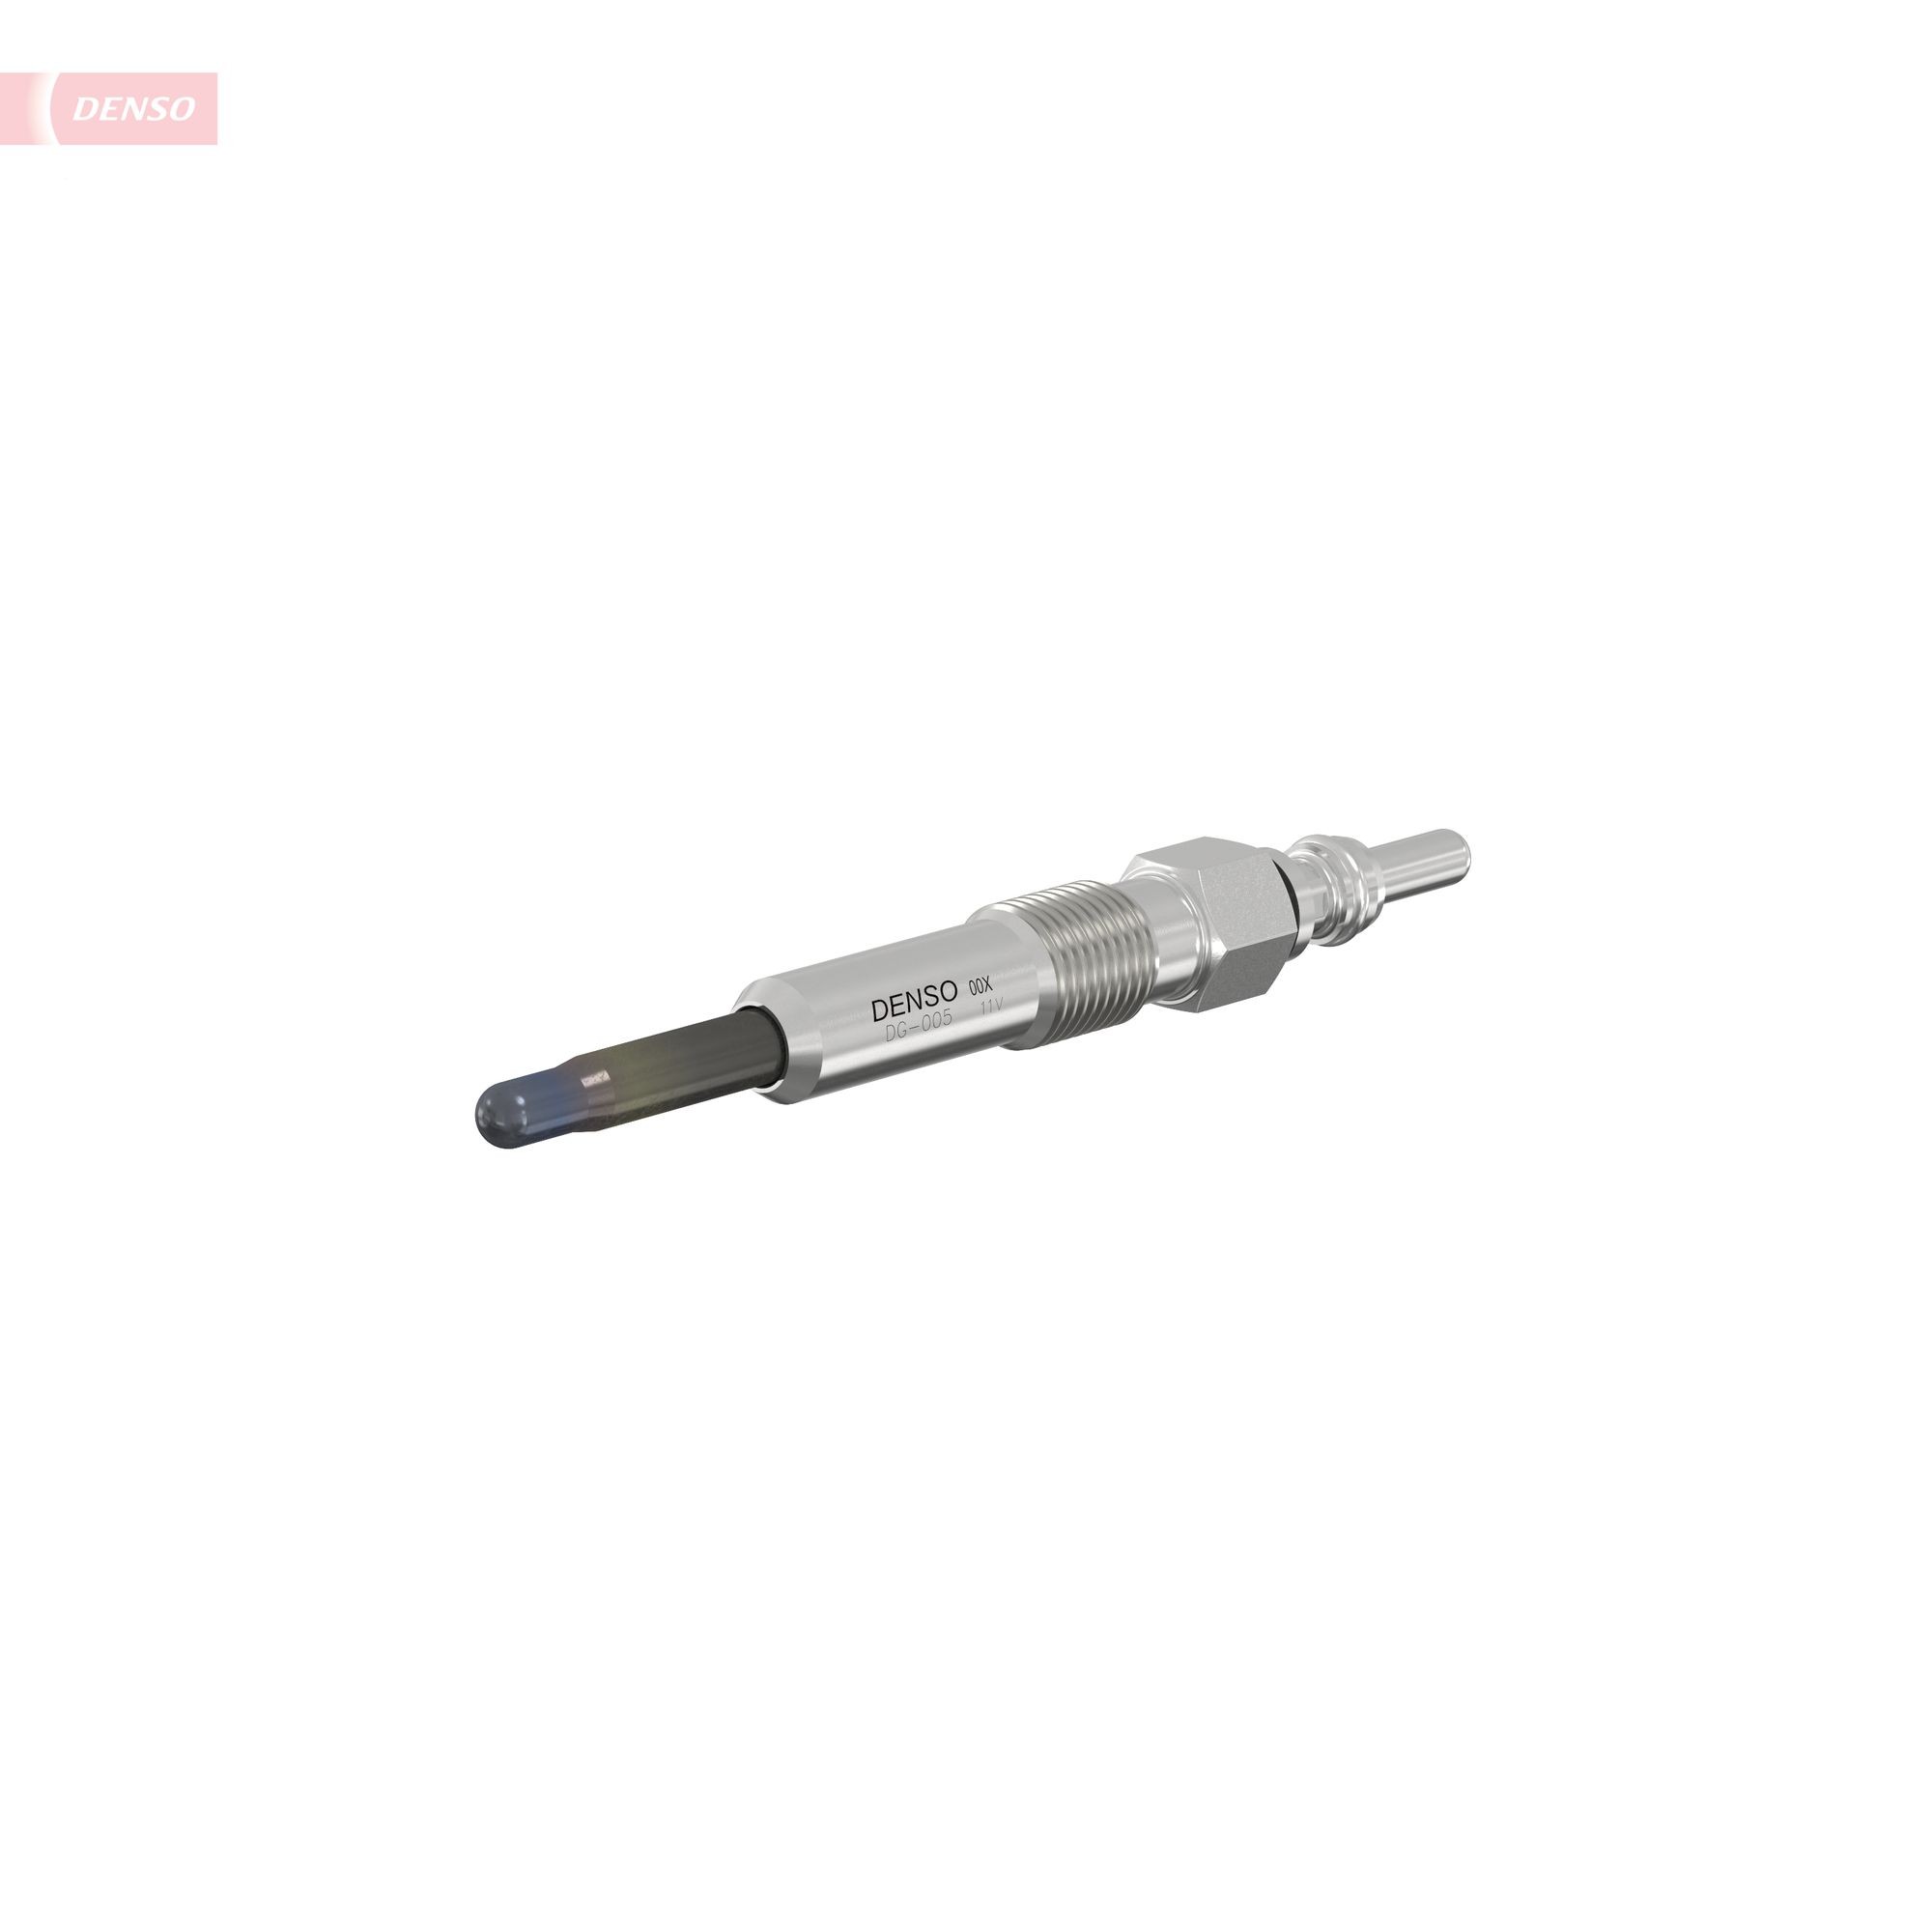 Glow Plug DENSO DG-005 - find, compare the prices and save!